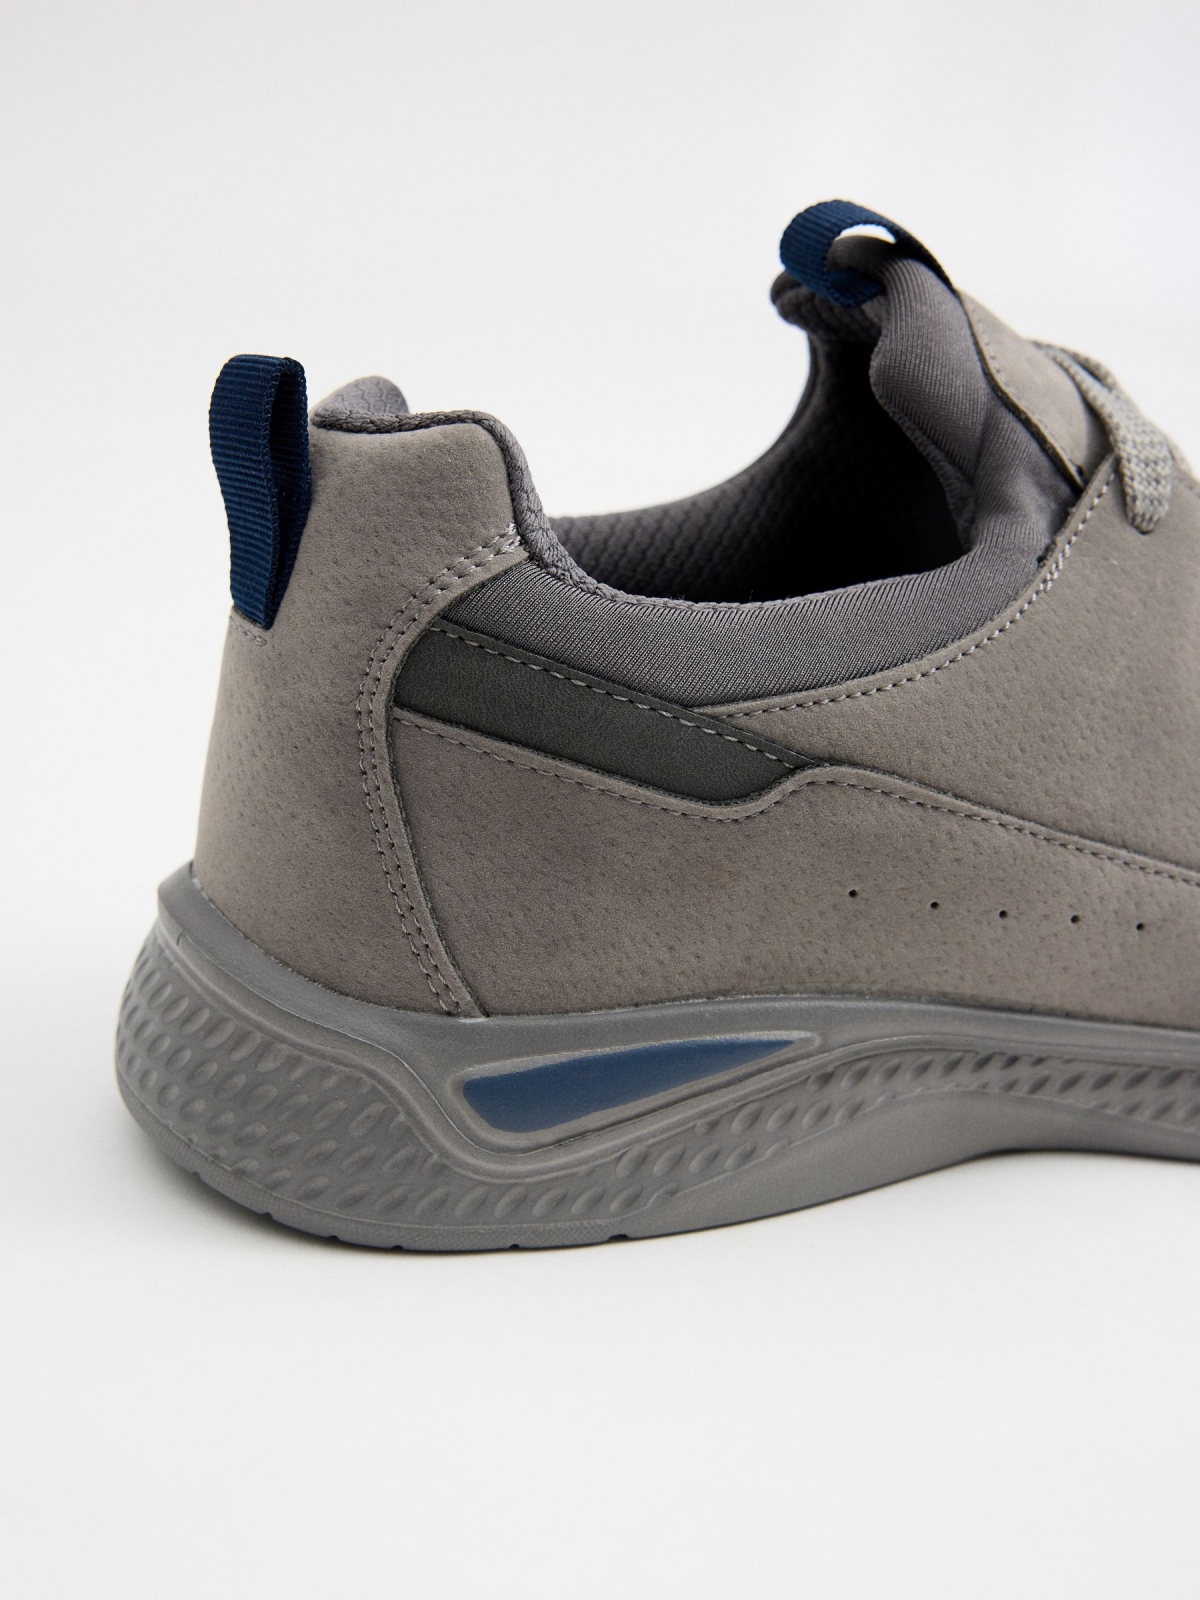 Casual gray leather effect trainers grey detail view